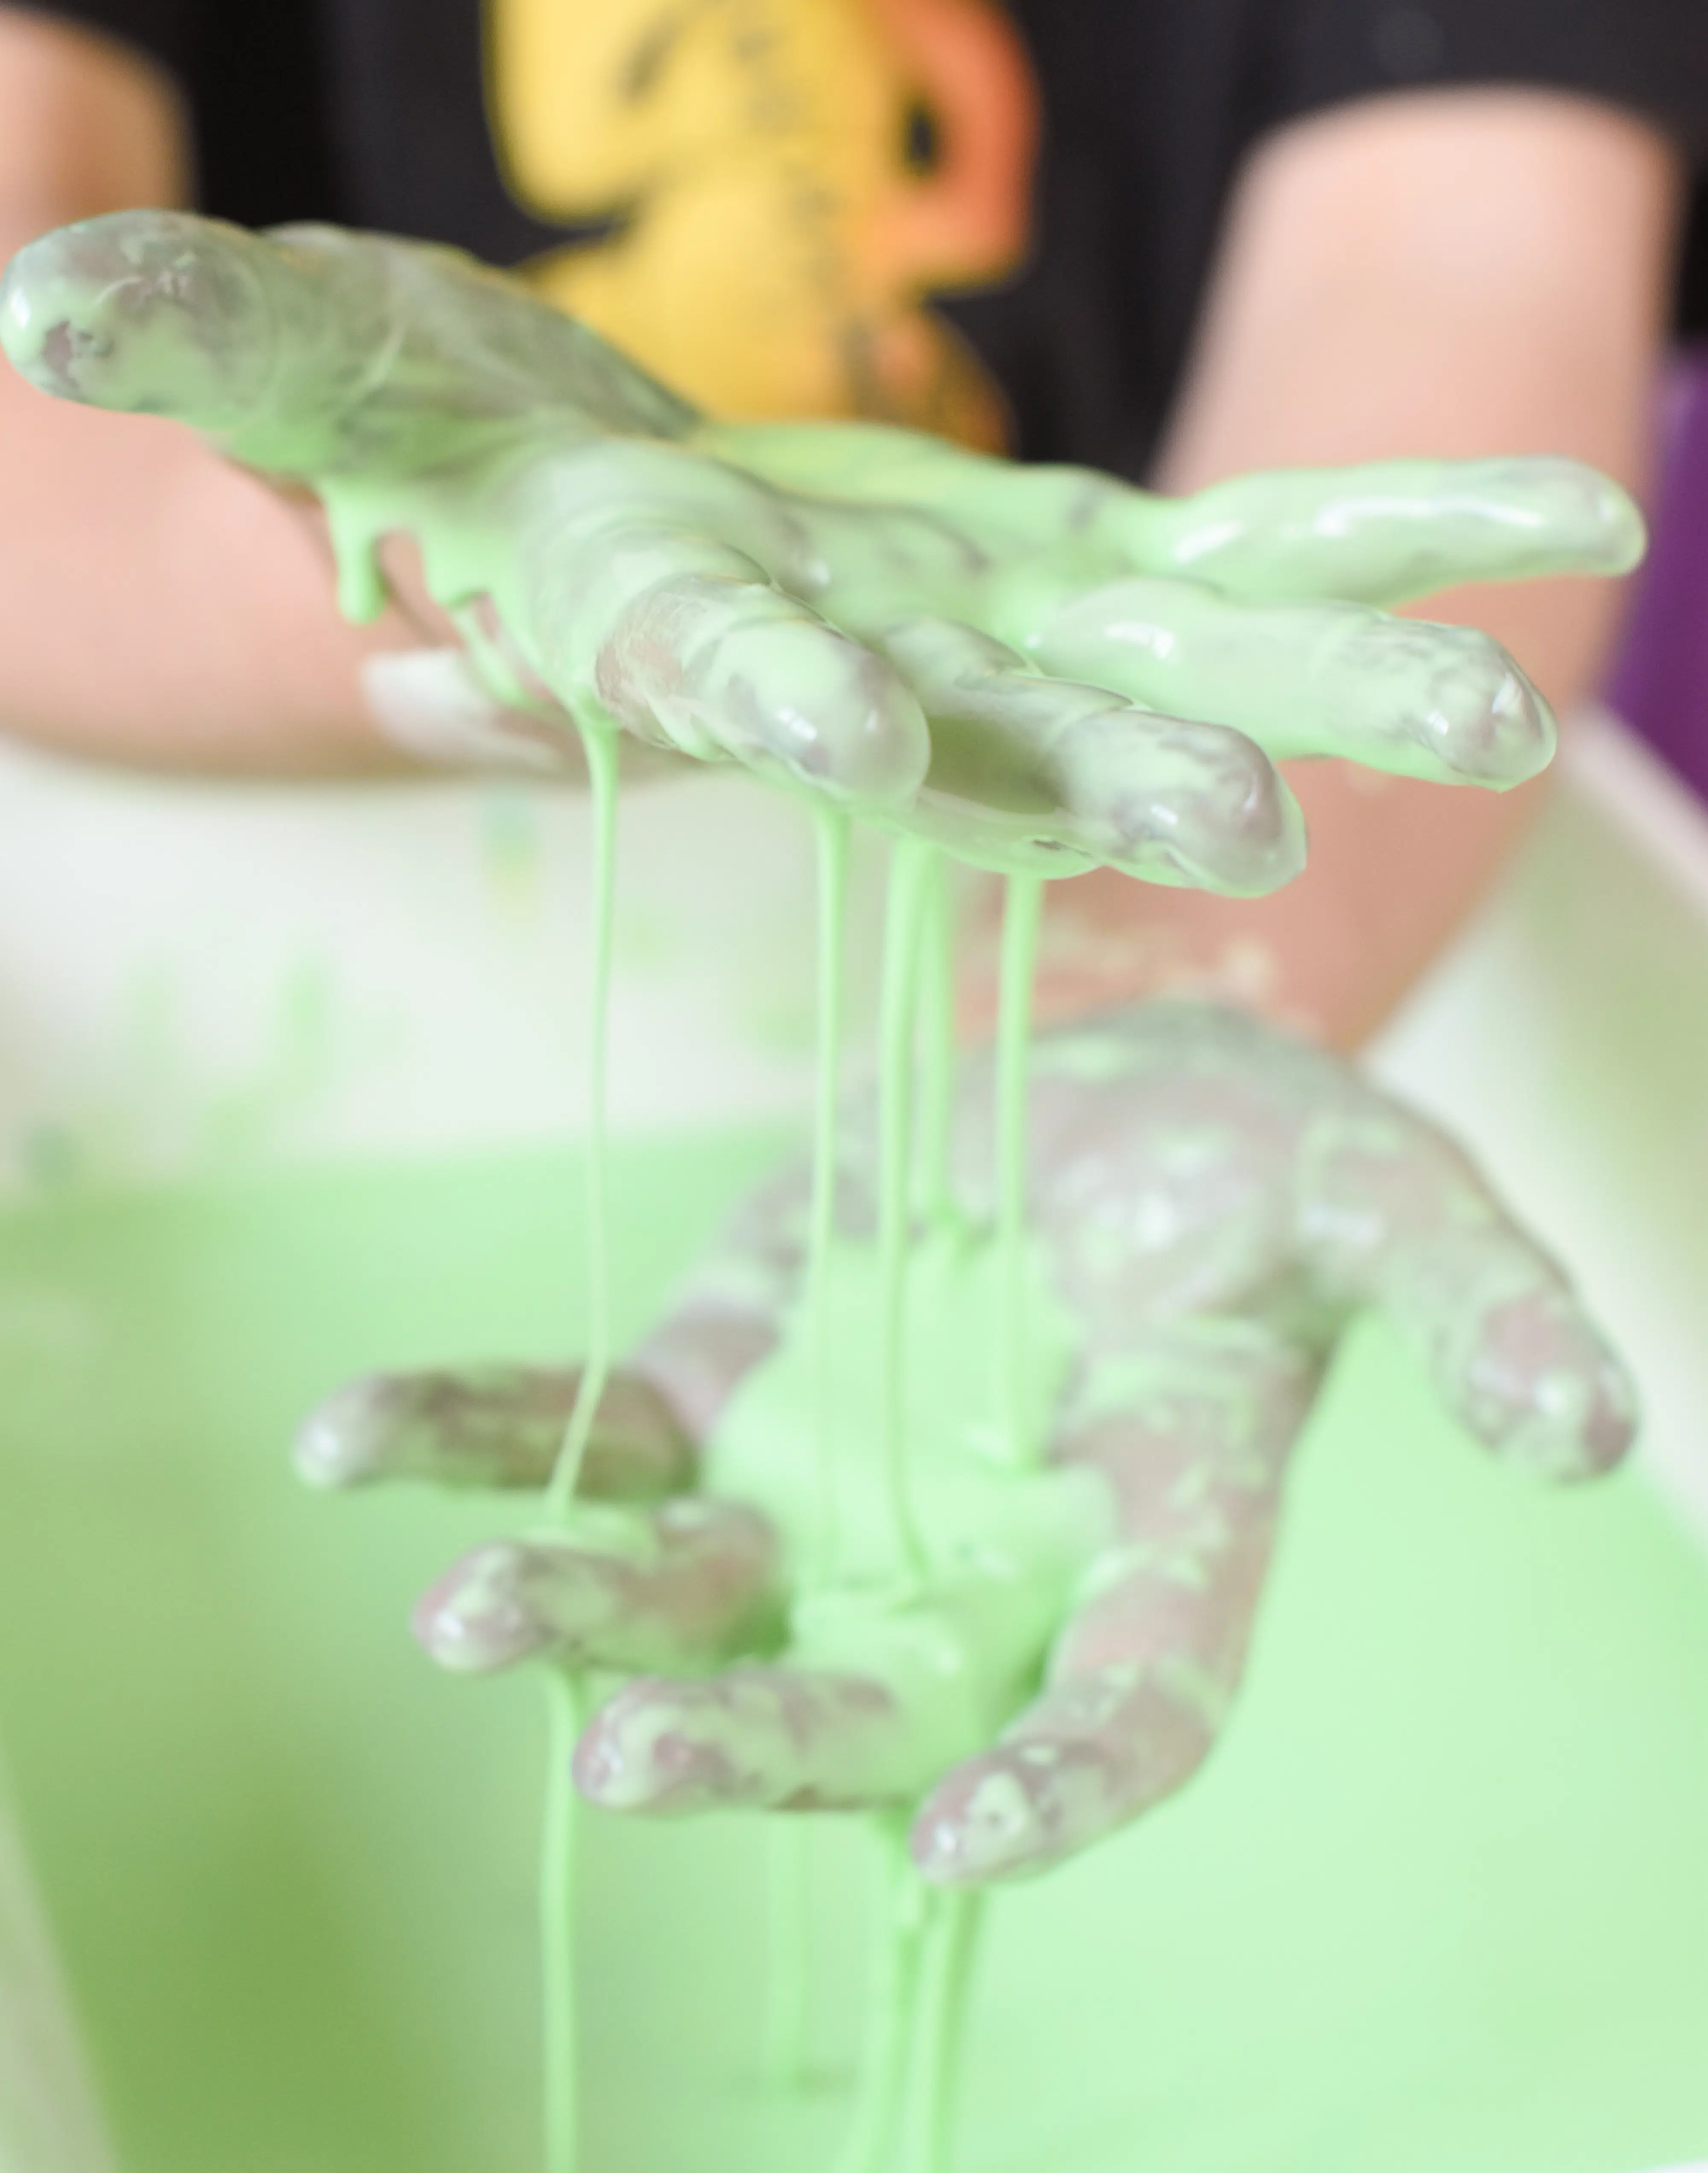 How to make Oobleck